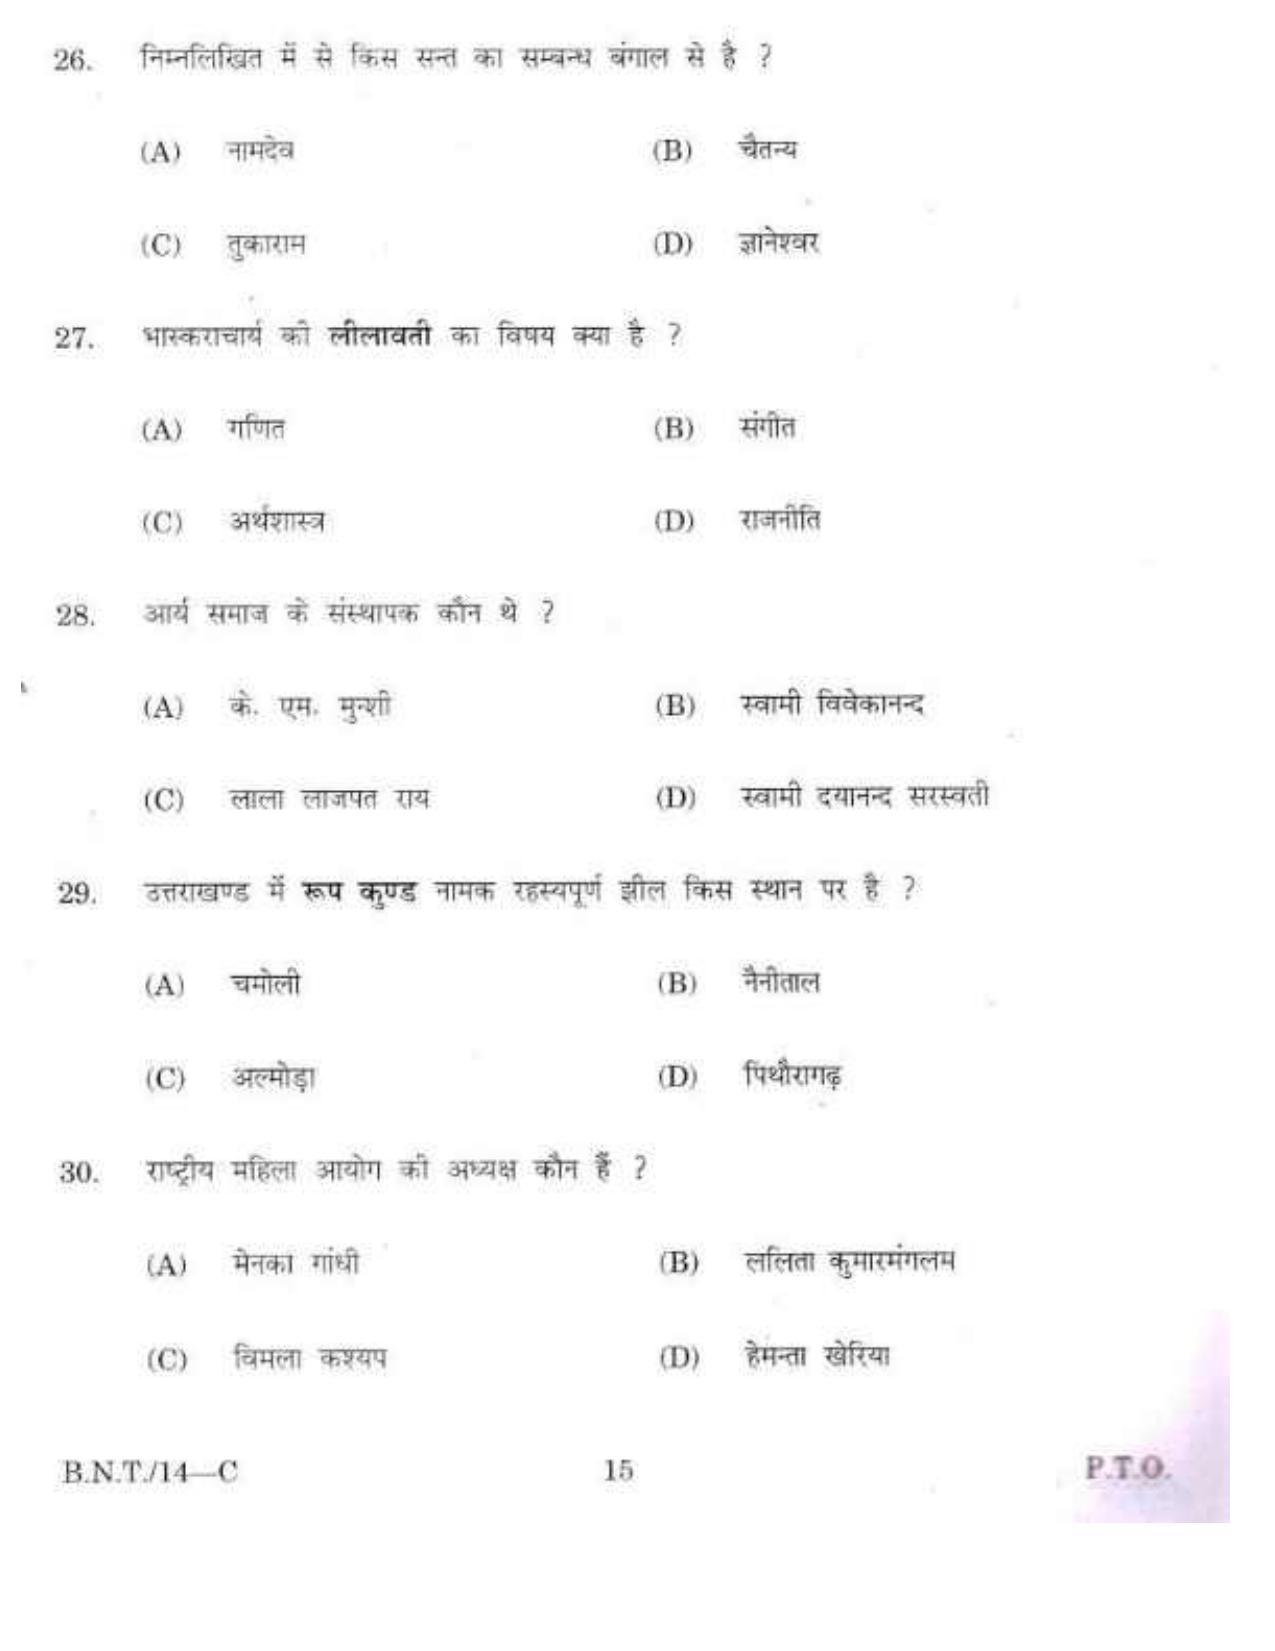 BSMFC Recovery Agent Old Question Papers for General Knowledge - Page 15